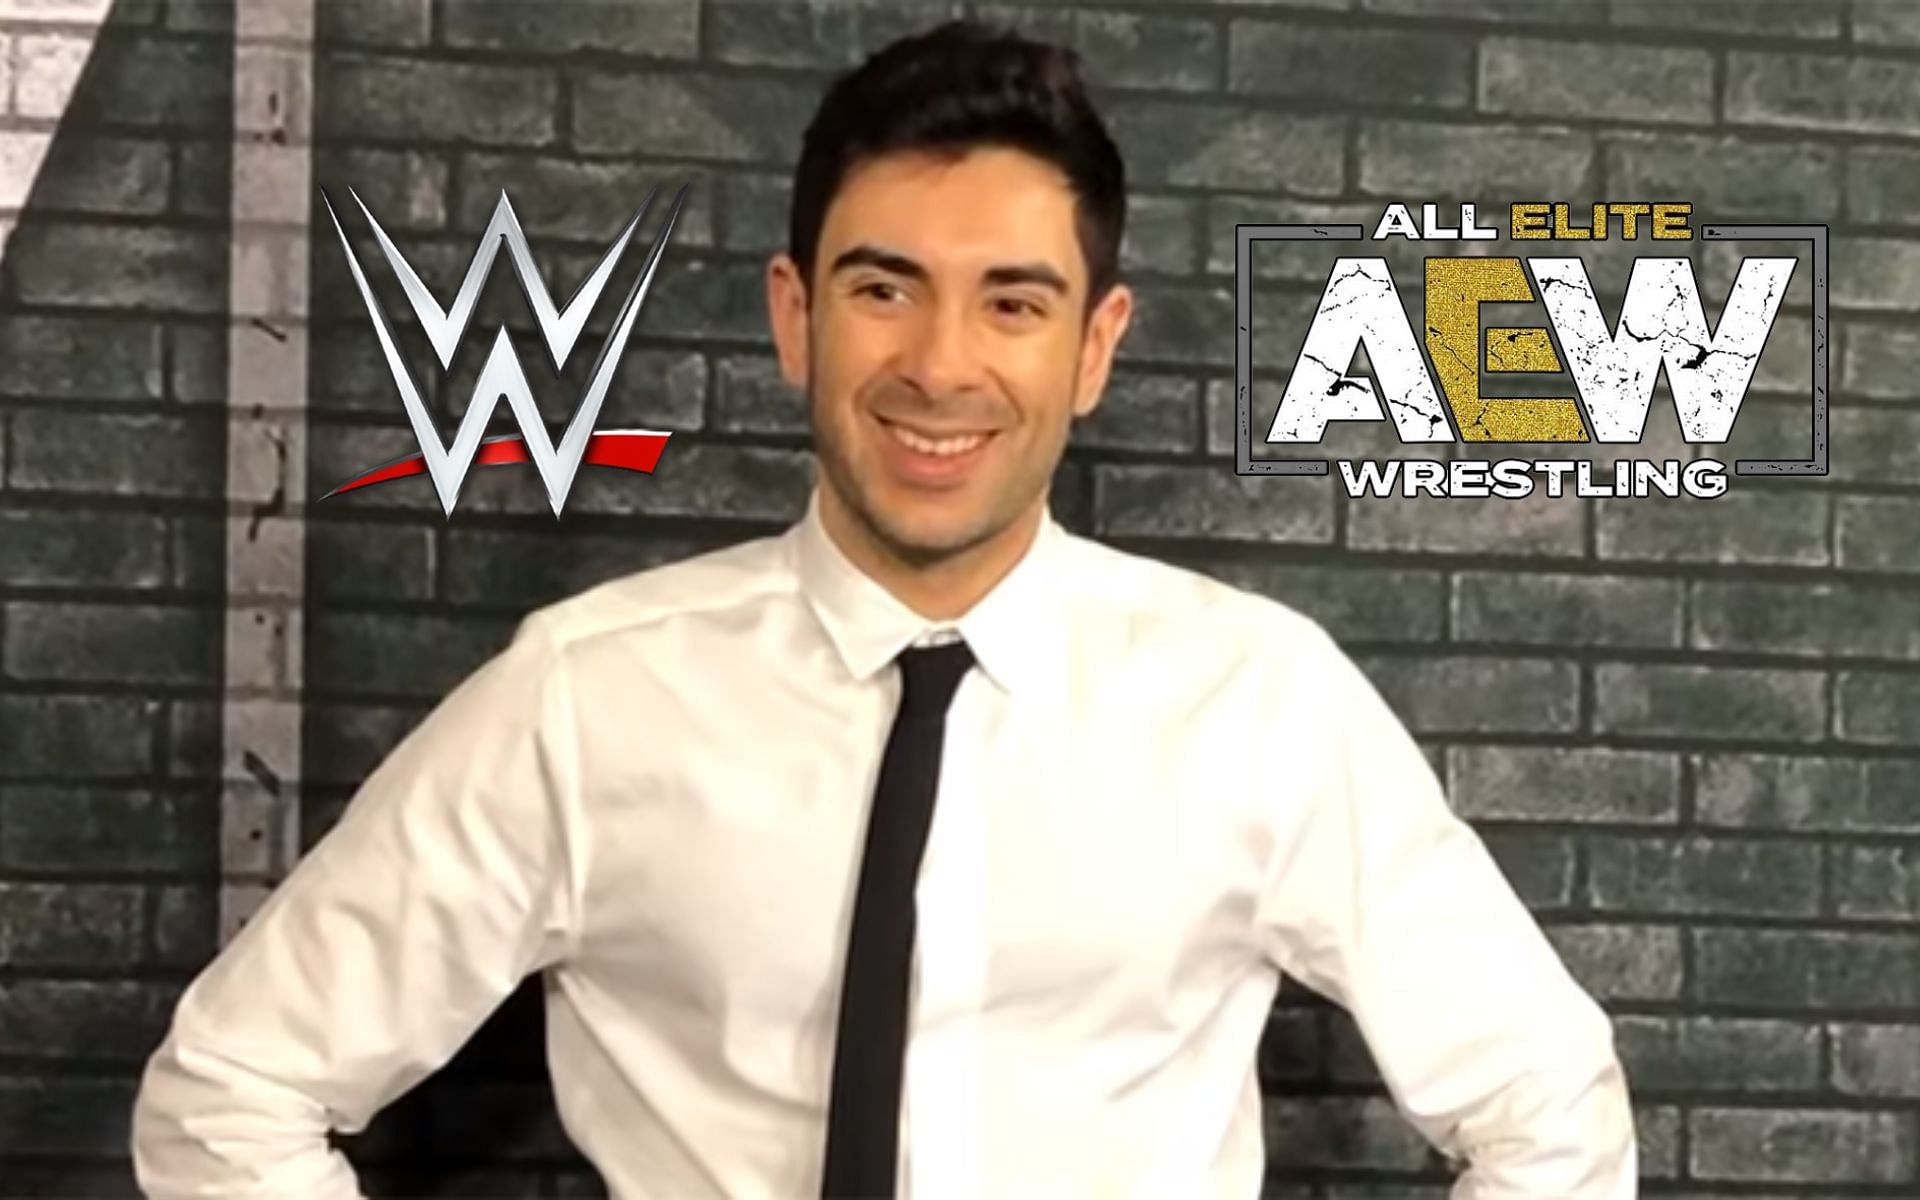 AEW President Tony Khan acquired another former WWE talents.